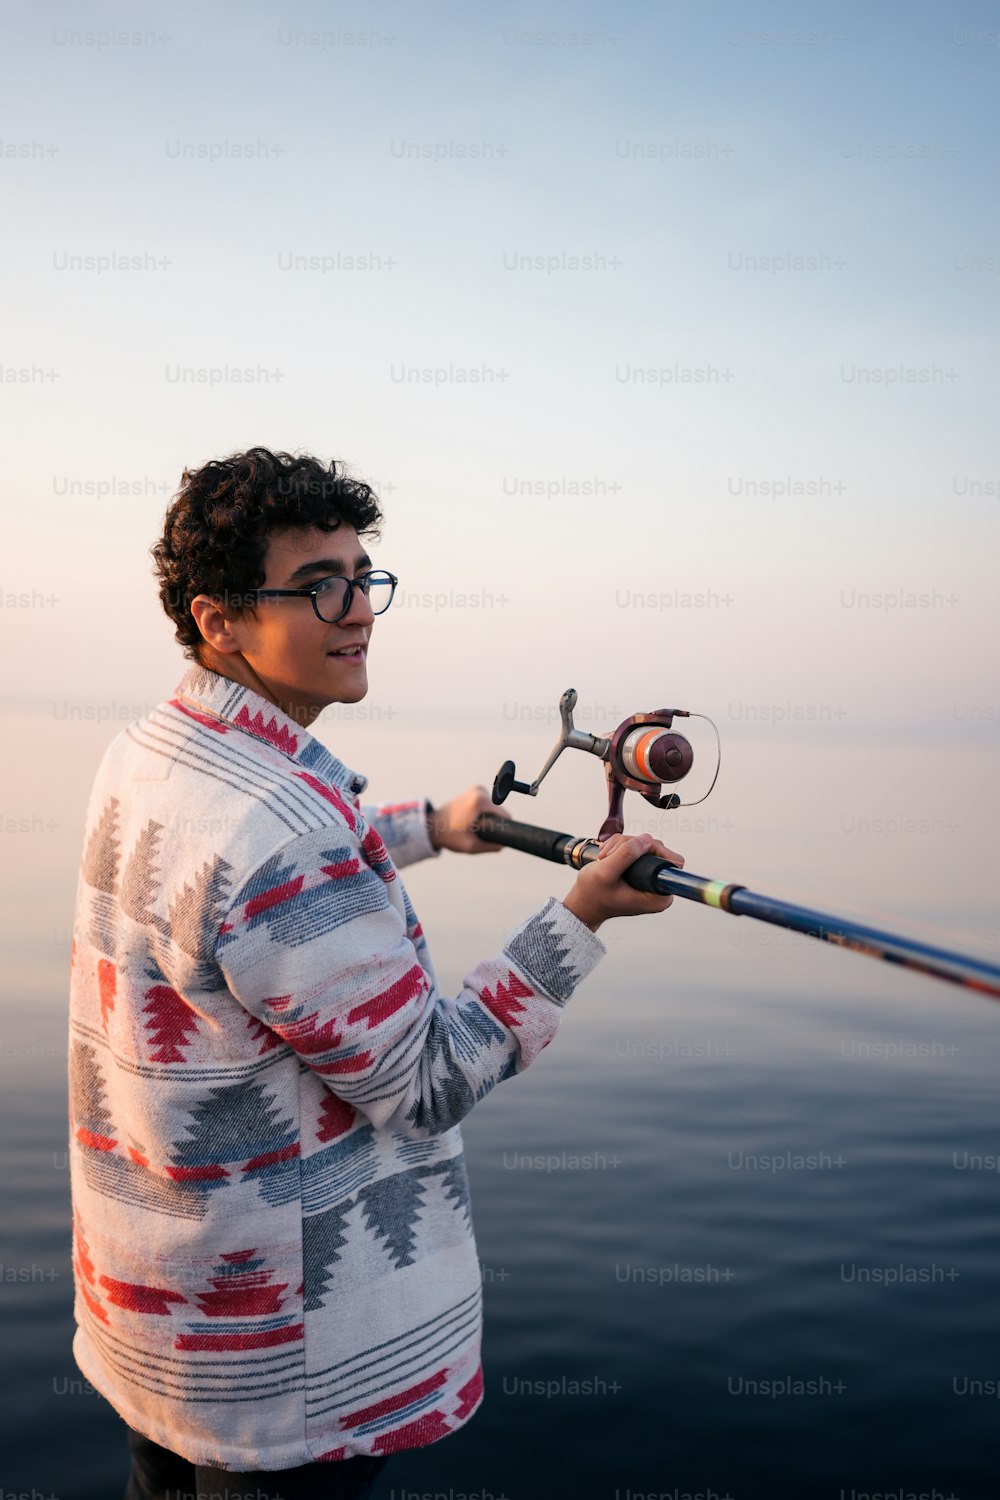 A woman holding a fishing rod on a boat photo – Fishing Image on